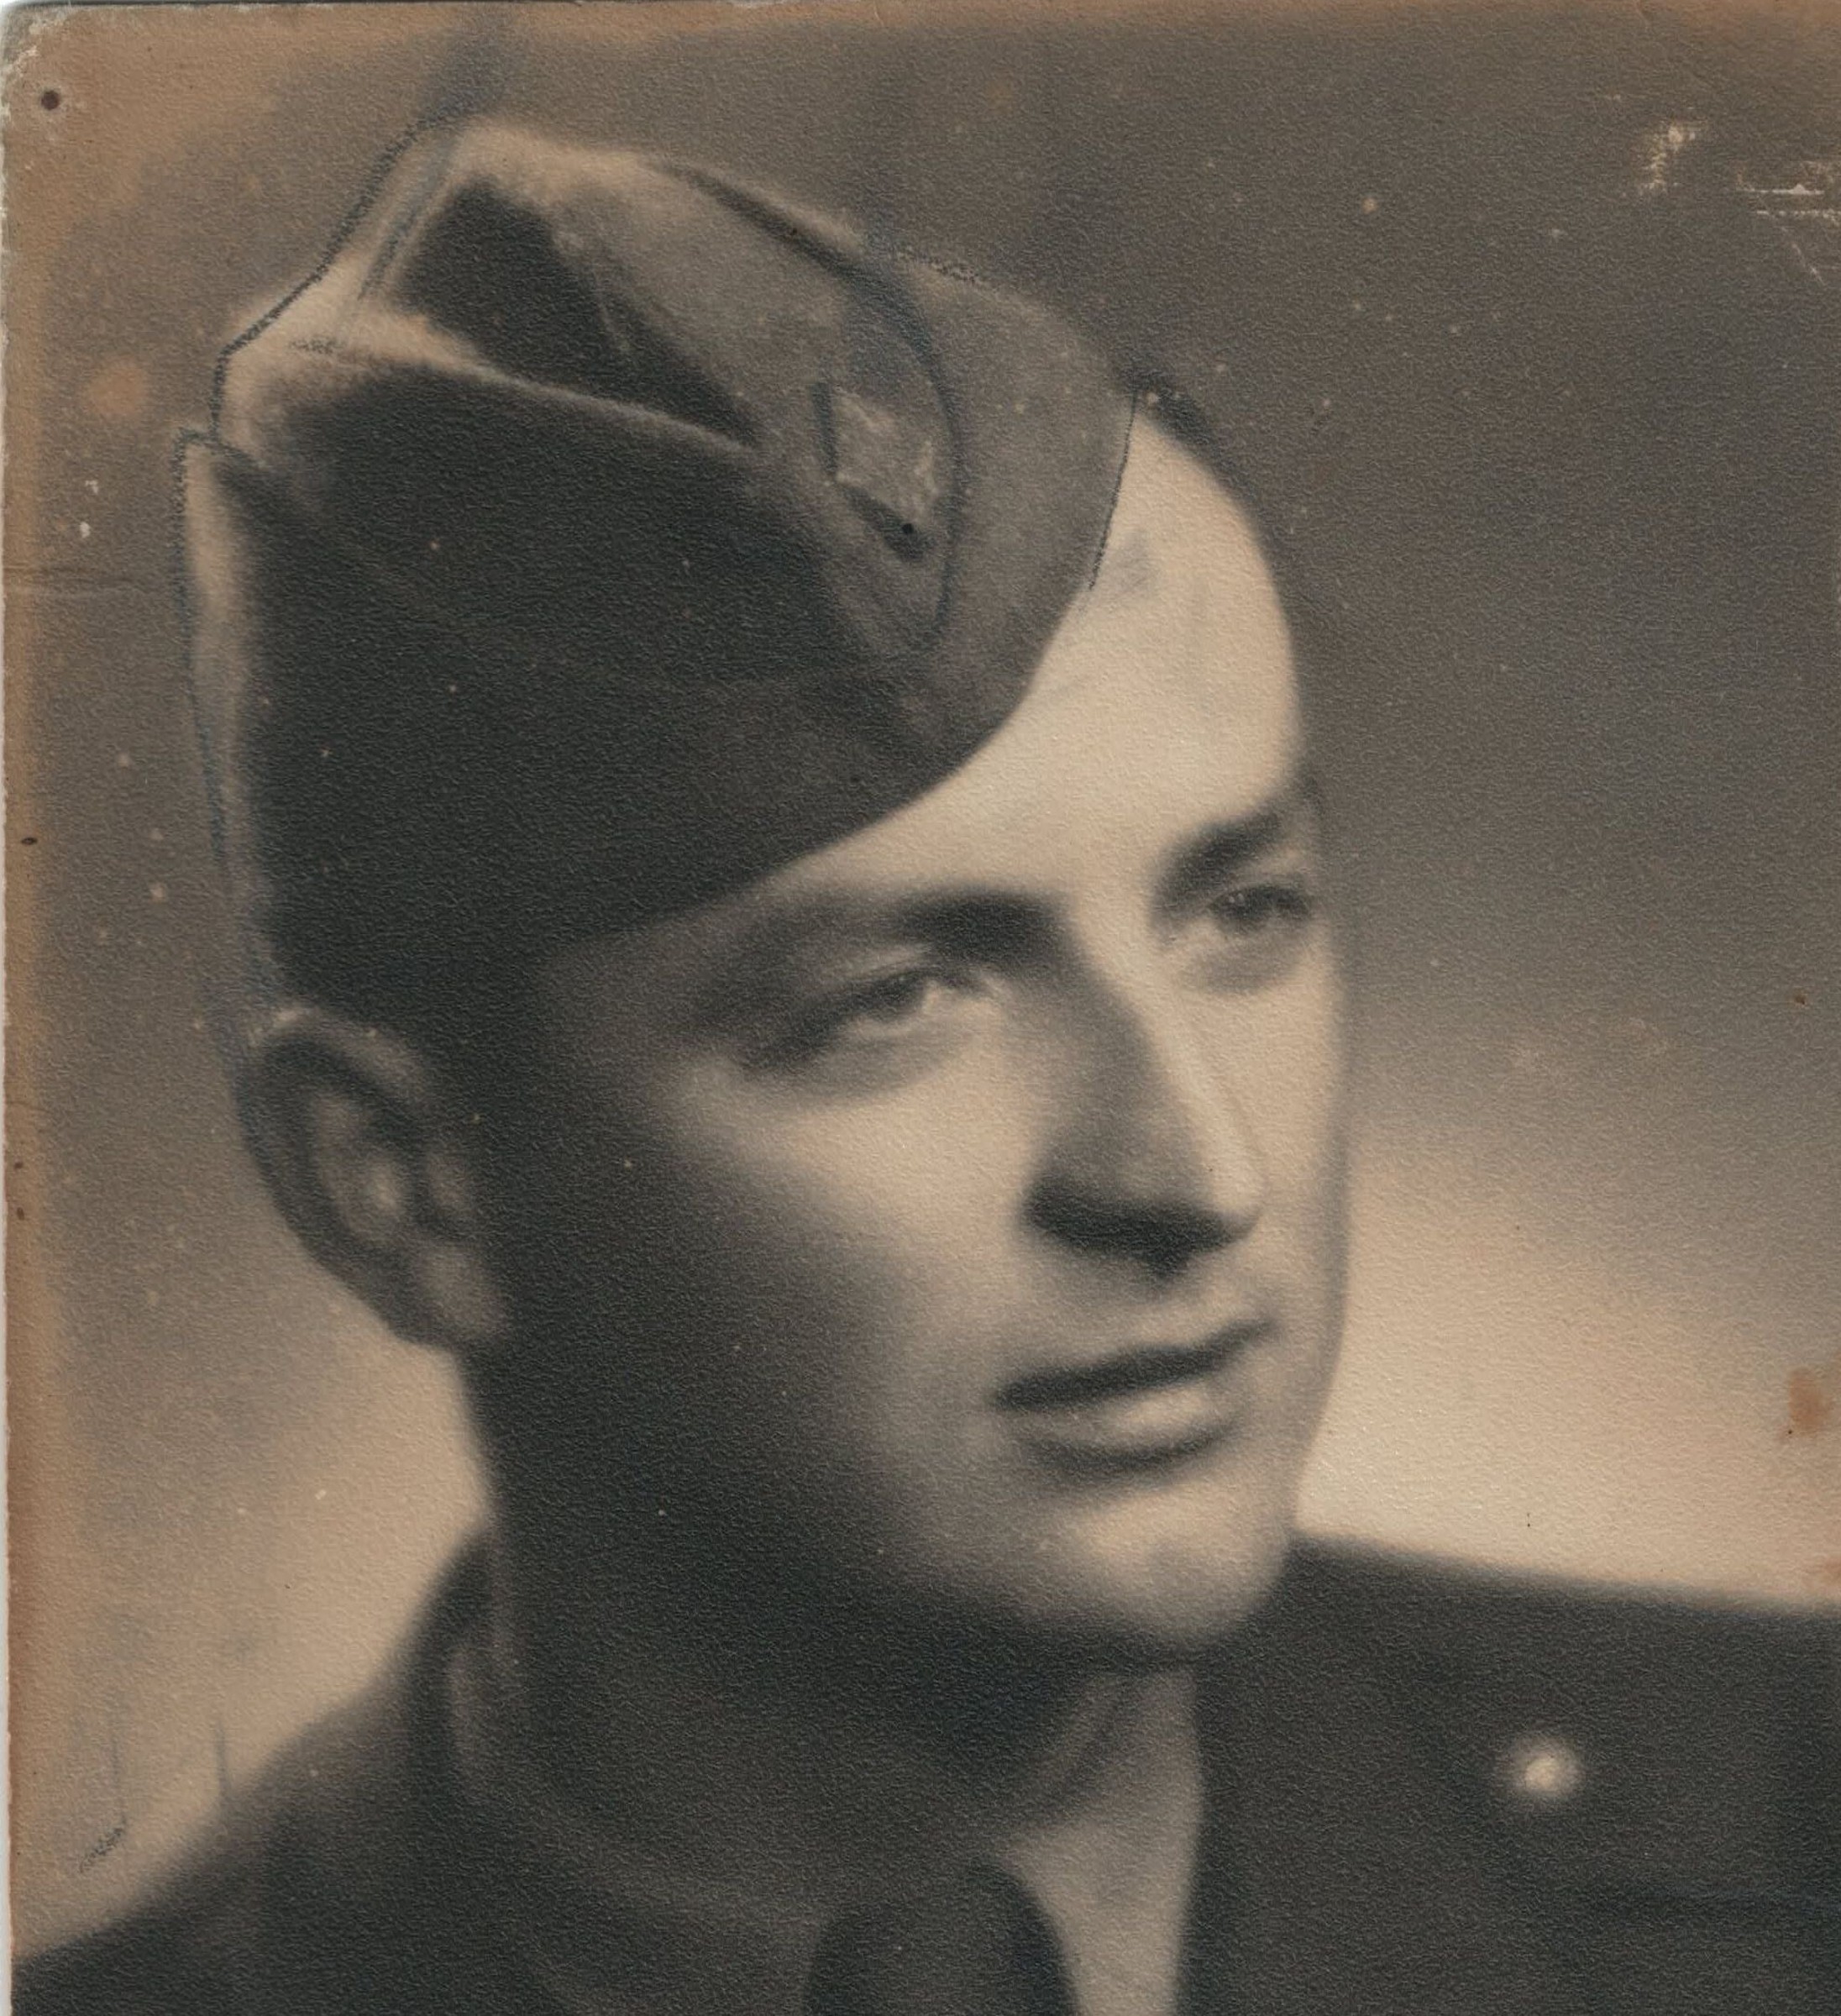 Jan serving in the army, portrait, Opava/Krnov, 1948